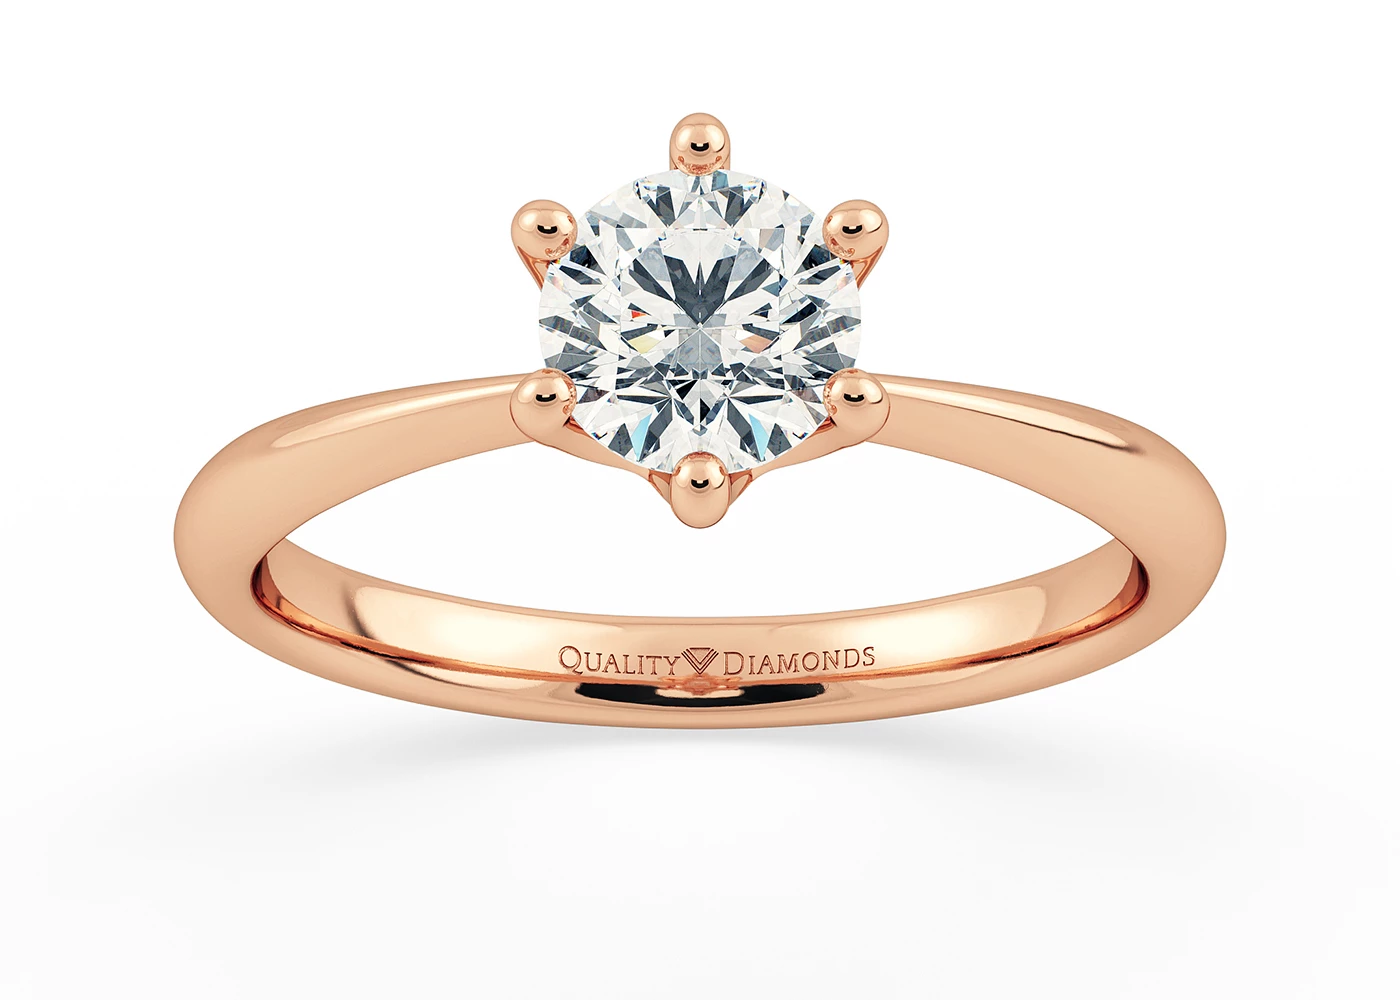 Six Claw Round Brilliant Amorette Diamond Ring in 9K Rose Gold